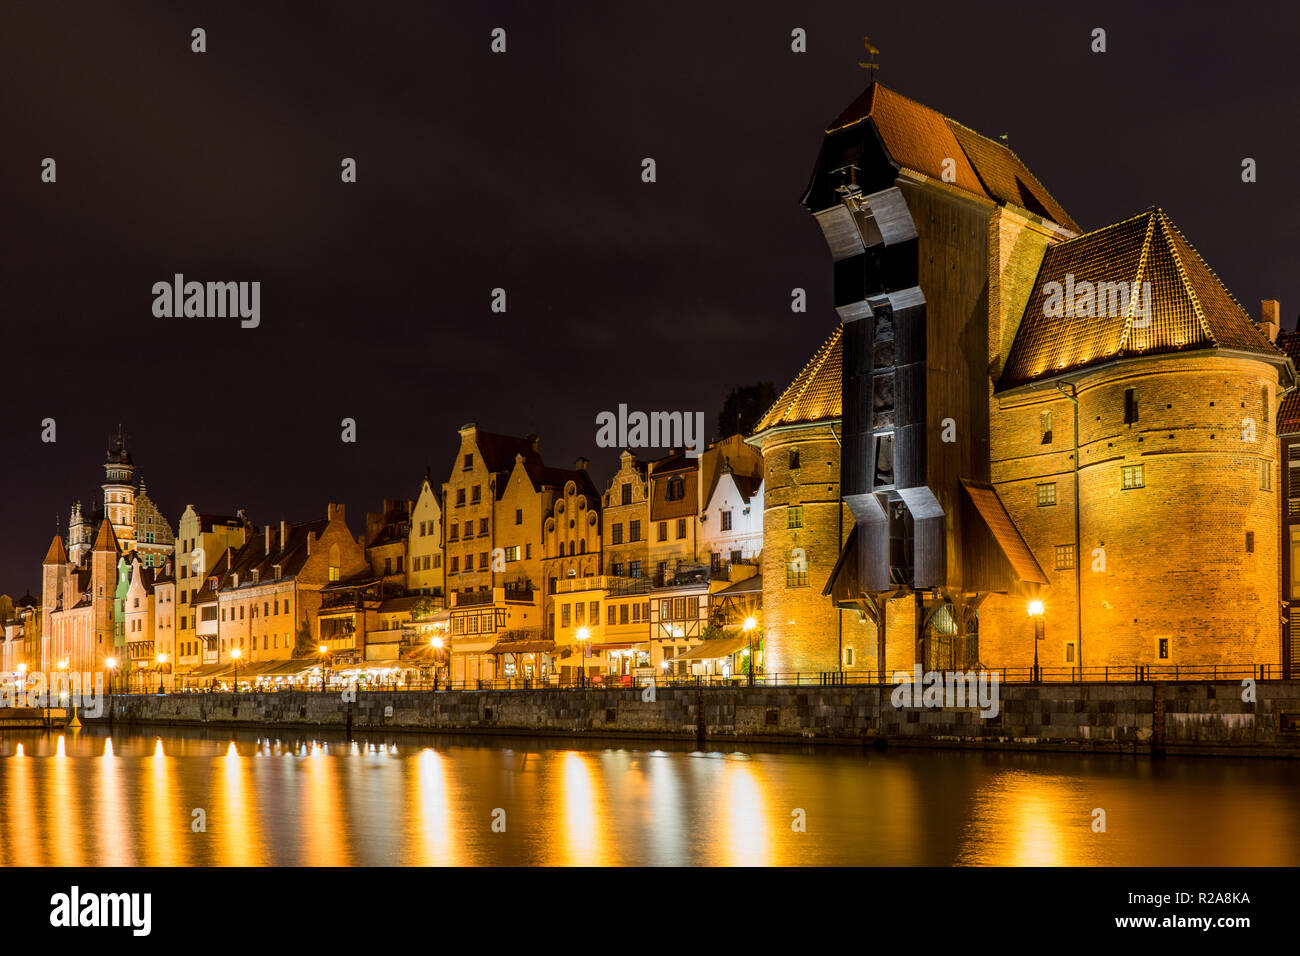 Night photograph of the canal waterfront of the city of Gdansk, Poland. Stock Photo